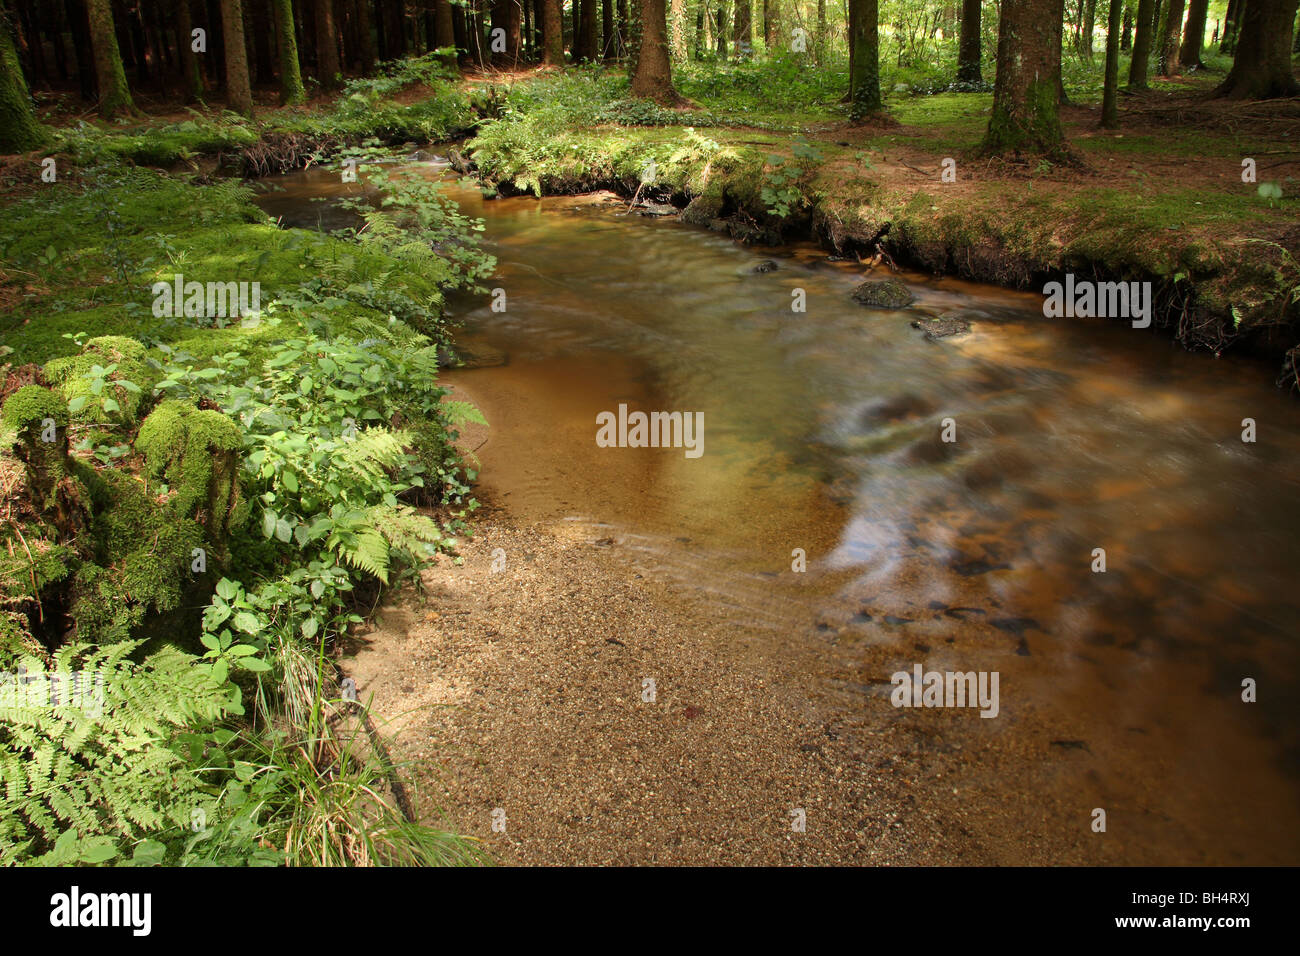 A fast flowing stream flowing through a pine forest with mossy bank and ferns. Stock Photo